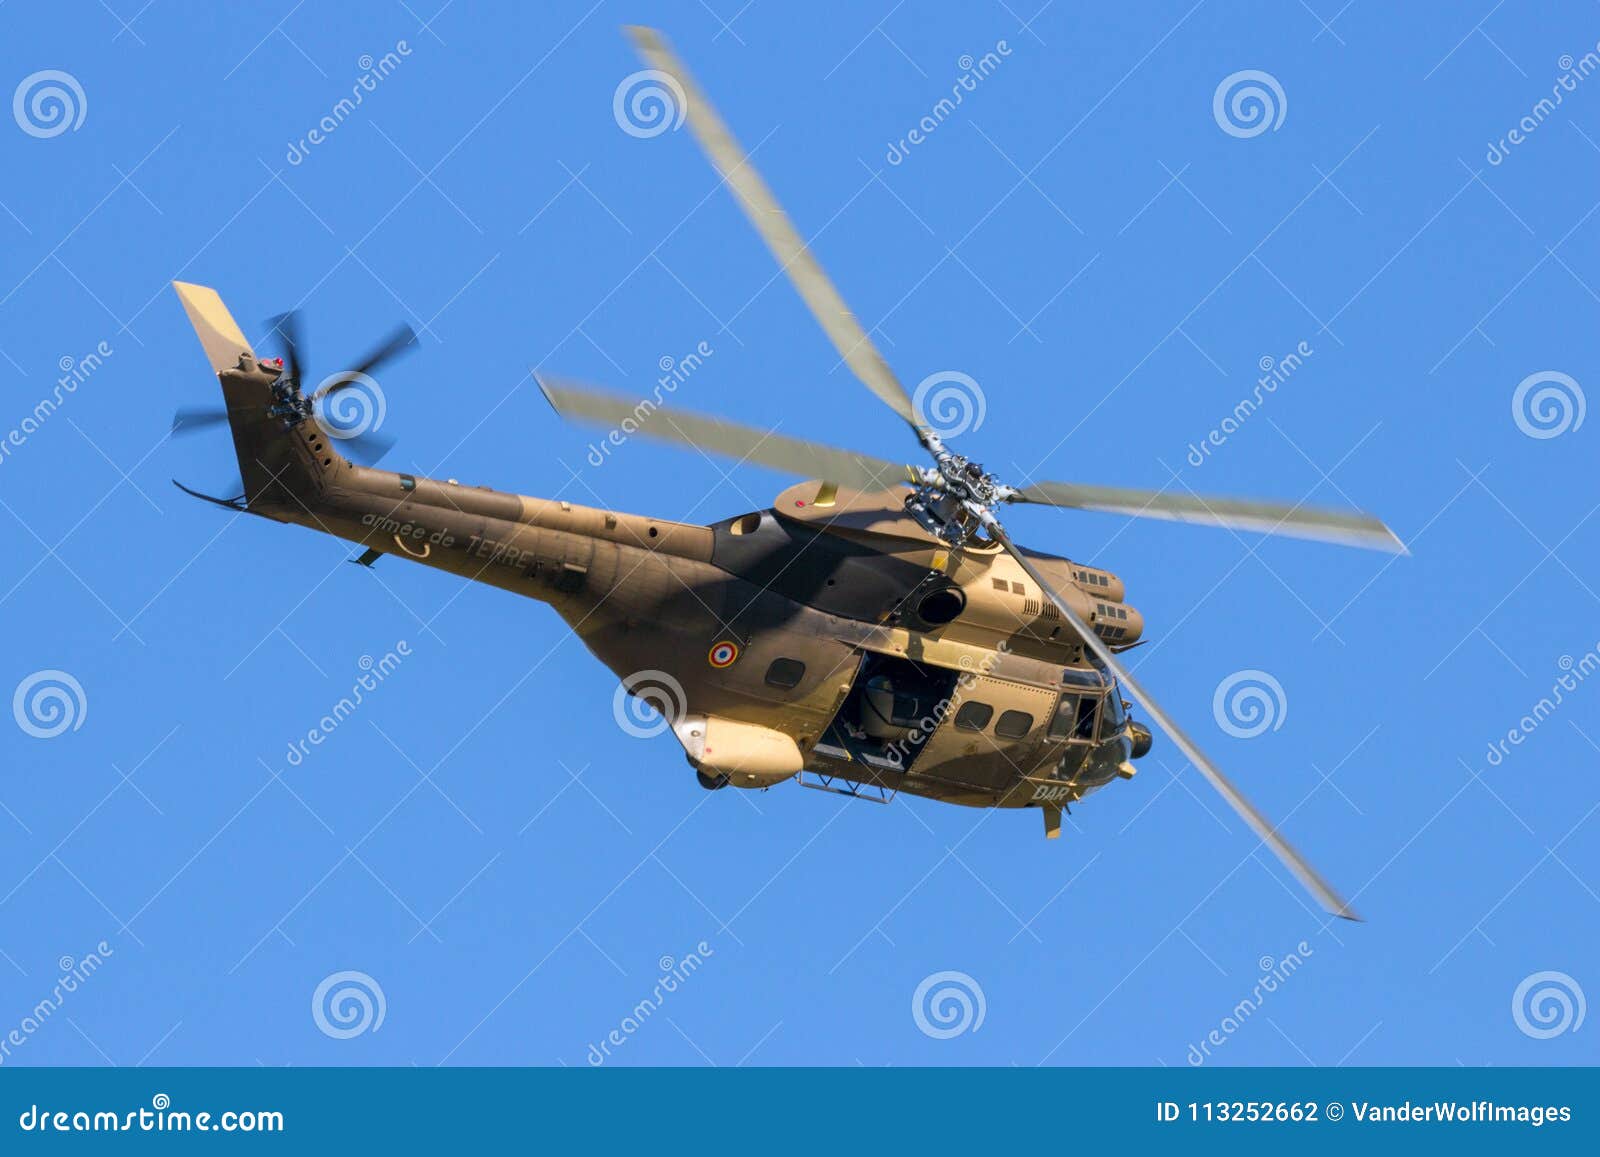 French Army Puma Helicopter Desert Camouflage Editorial Photography Image of aviation: 113252662